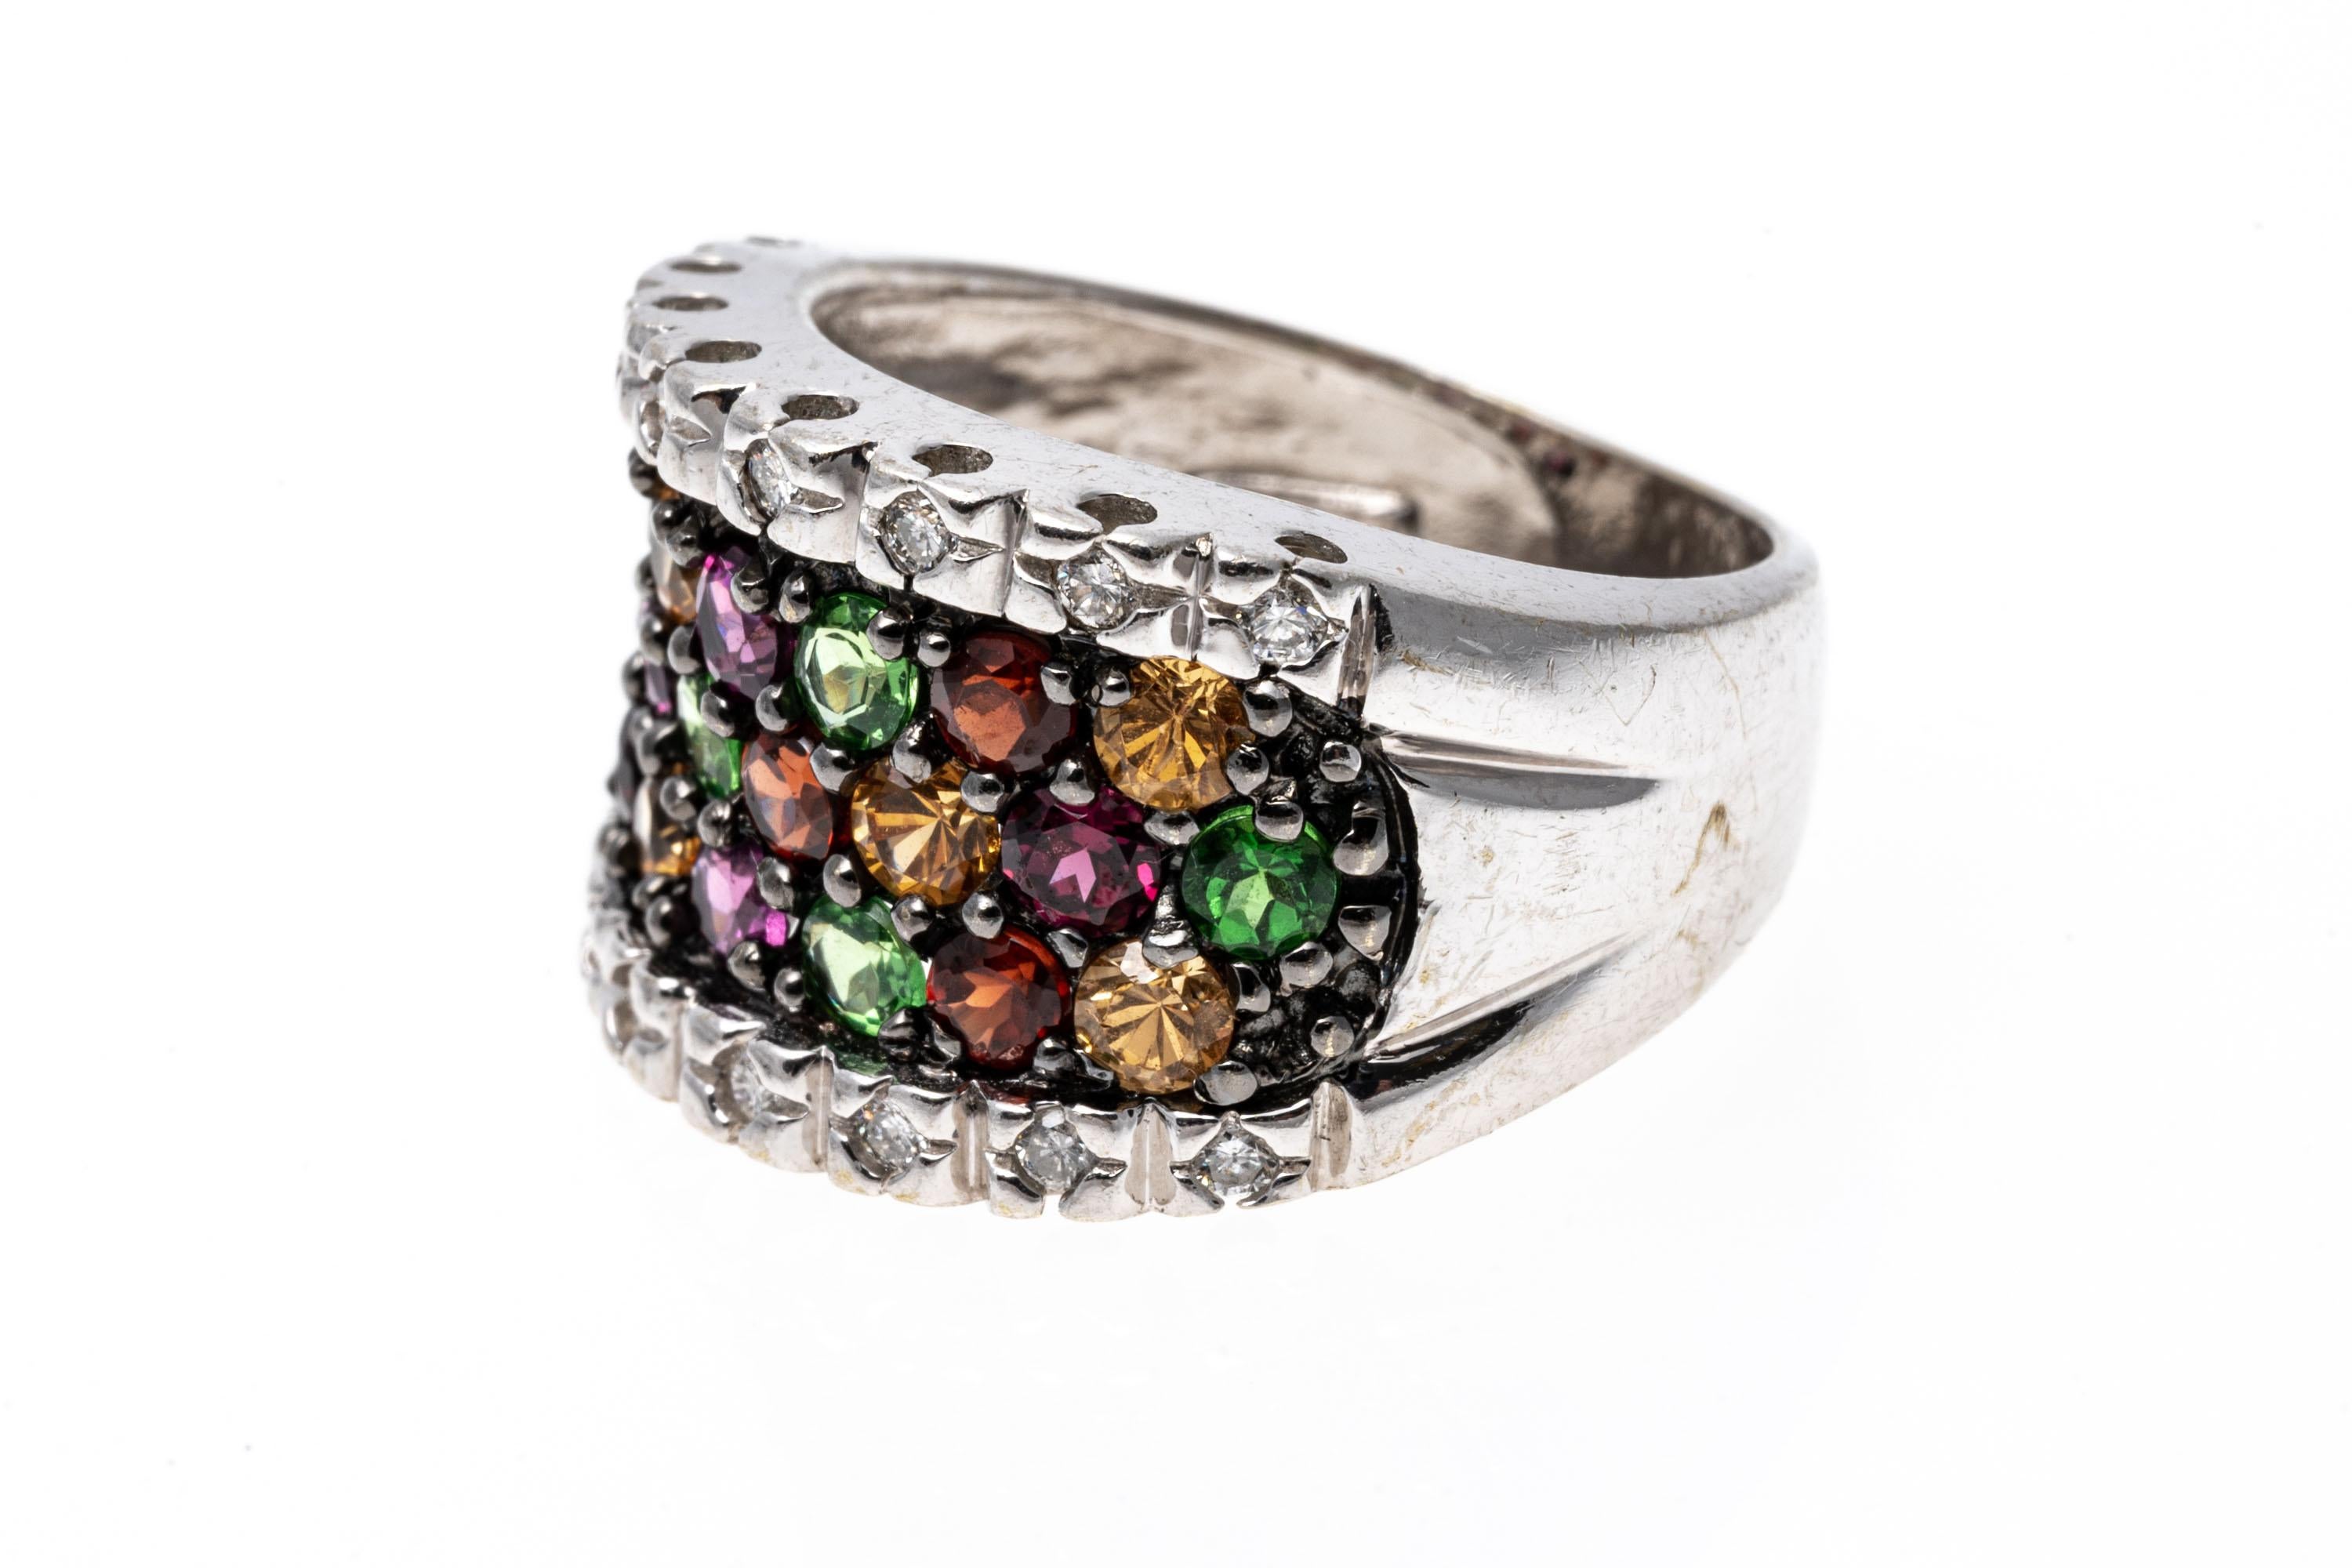 A cluster of round cut garnets in a brilliant array of reds, yellows, greens and pinks trail over the face of this dynamic 14K white gold ring. To either side of the garnets is a row of diamonds that creates a brilliant flash. Garnets approximately